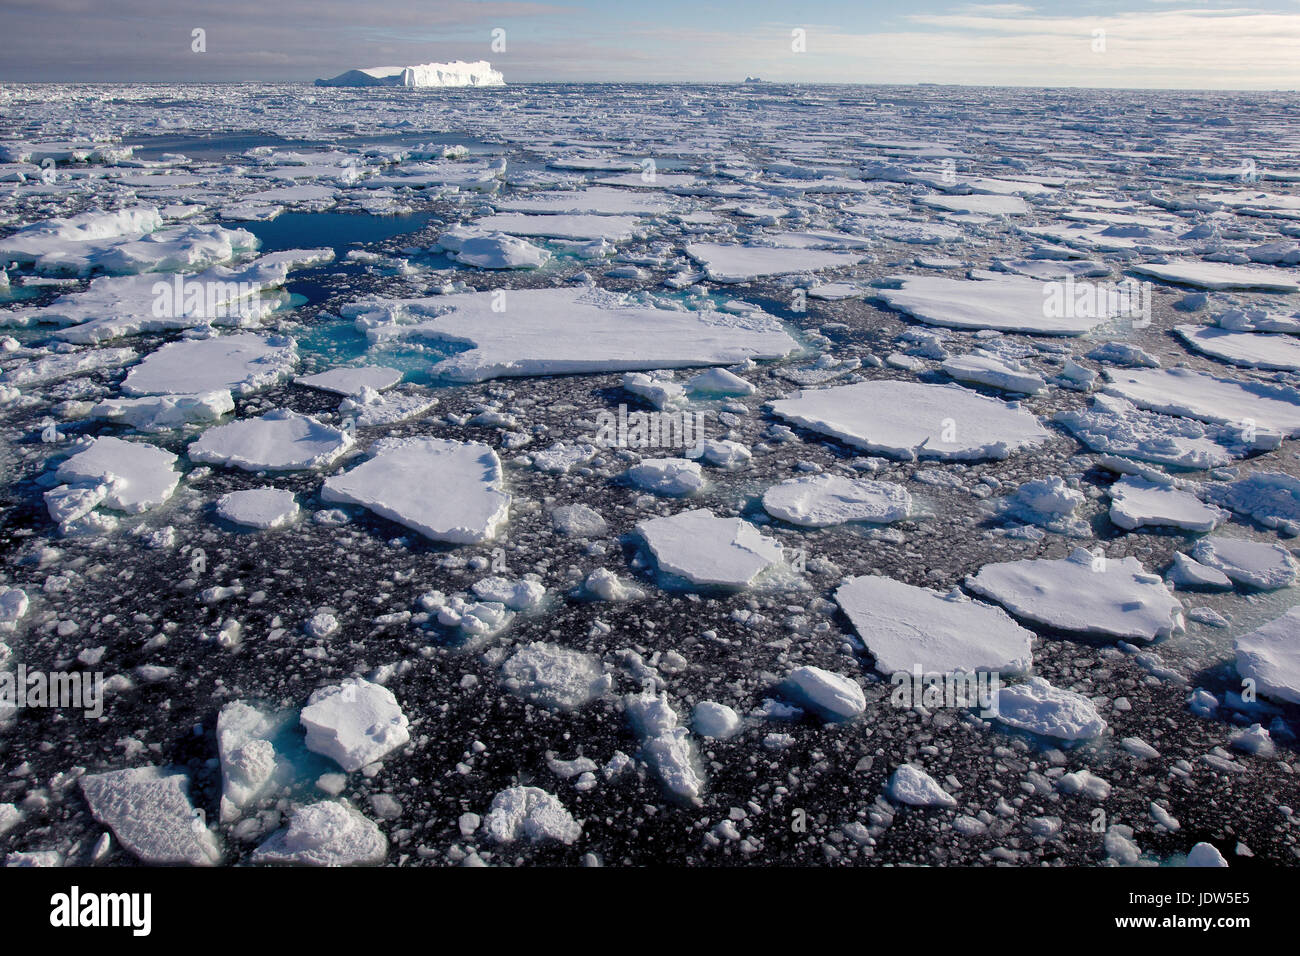 Ice floe in the southern ocean, 180 miles north of East Antarctica, Antarctica Stock Photo